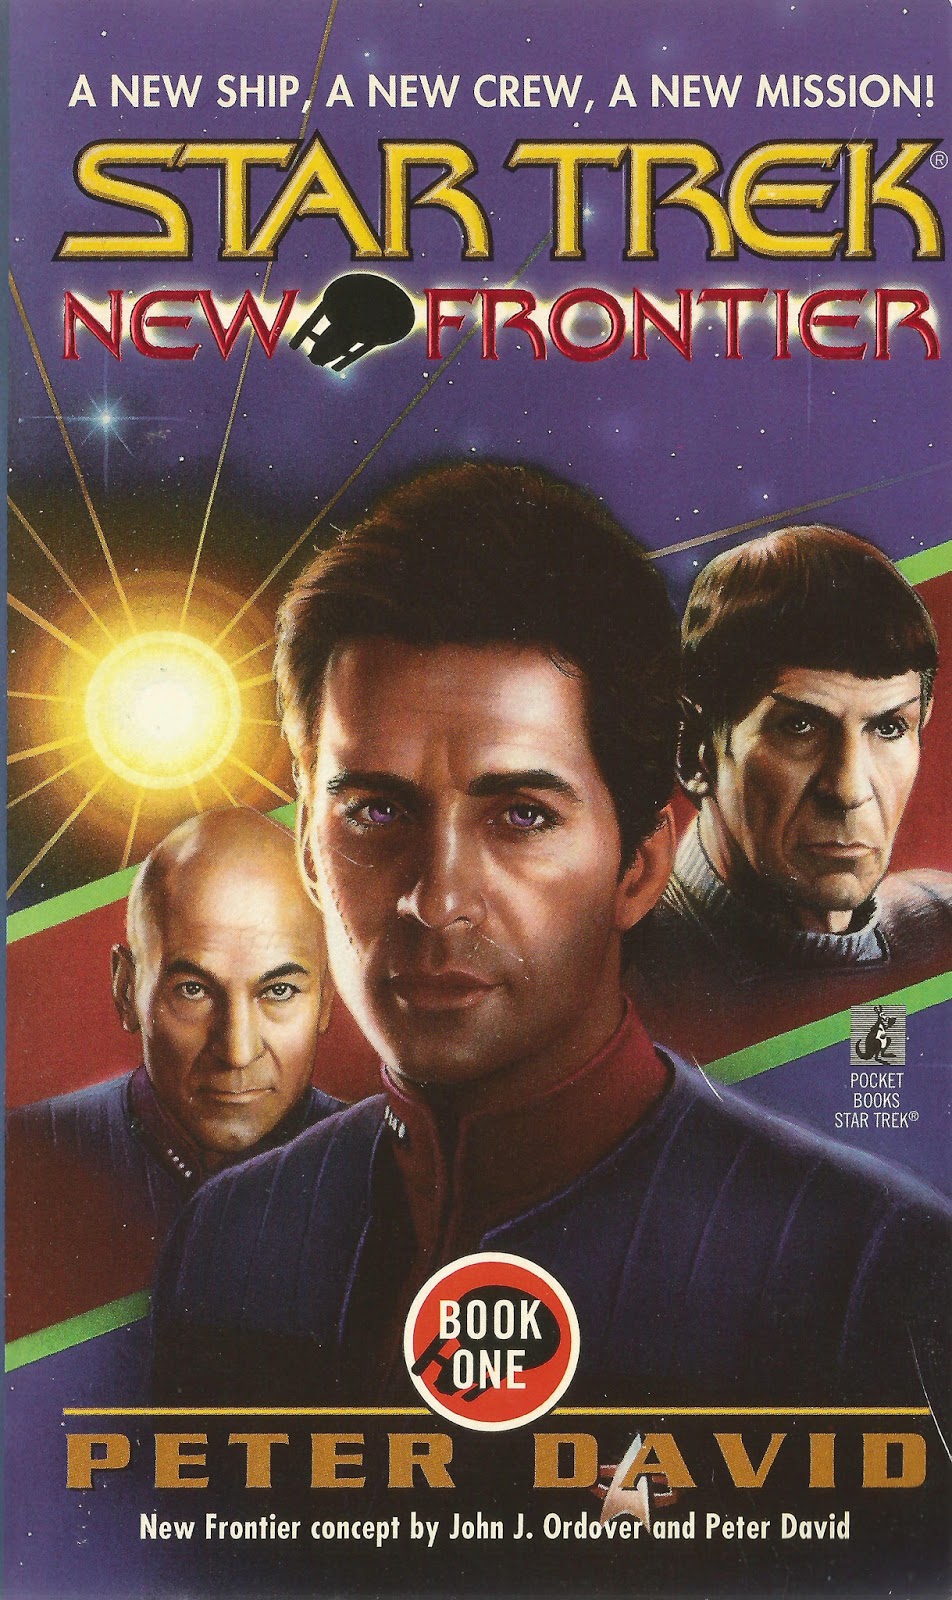 “Star Trek: New Frontier: 1 House of Cards” Review by Deepspacespines.com